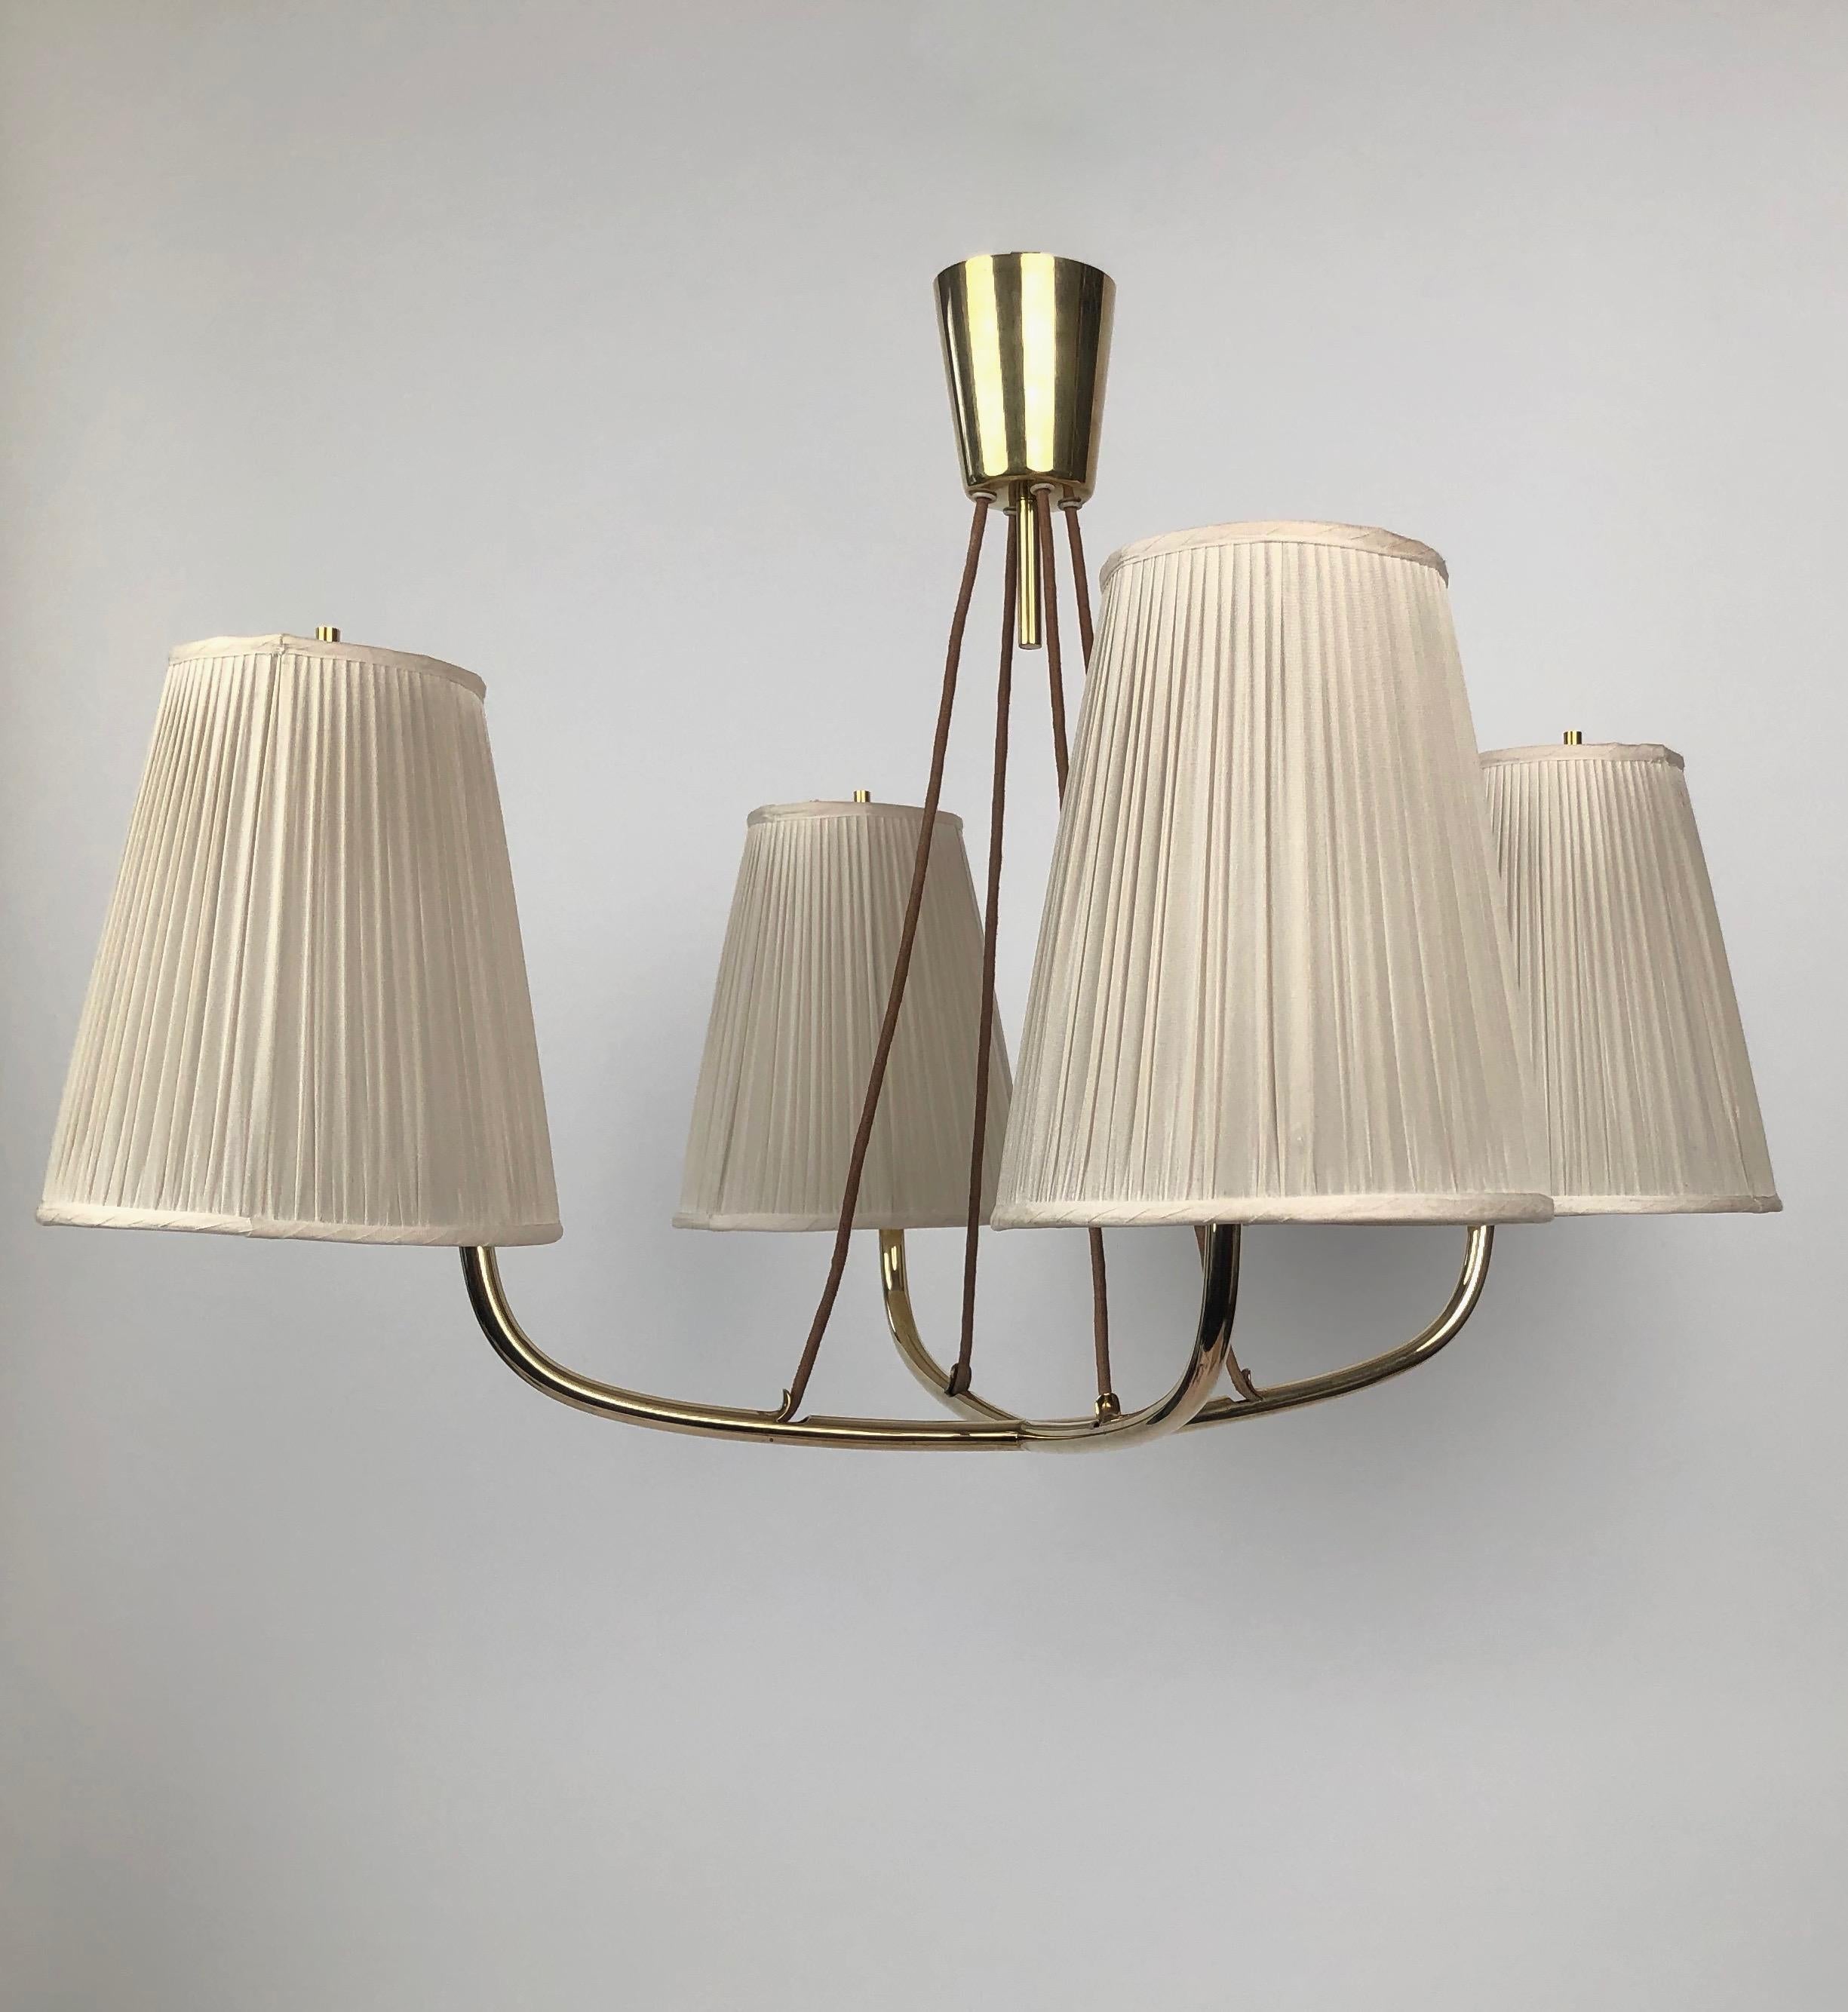 The Mexico Chandelier was designed by Jonathan Browning in the 1940's, it gently hangs from the ceiling on 4 cloth covered cords and emits a soft bright light that is elegant and functional . Made of polished brass, this example was manufactured in